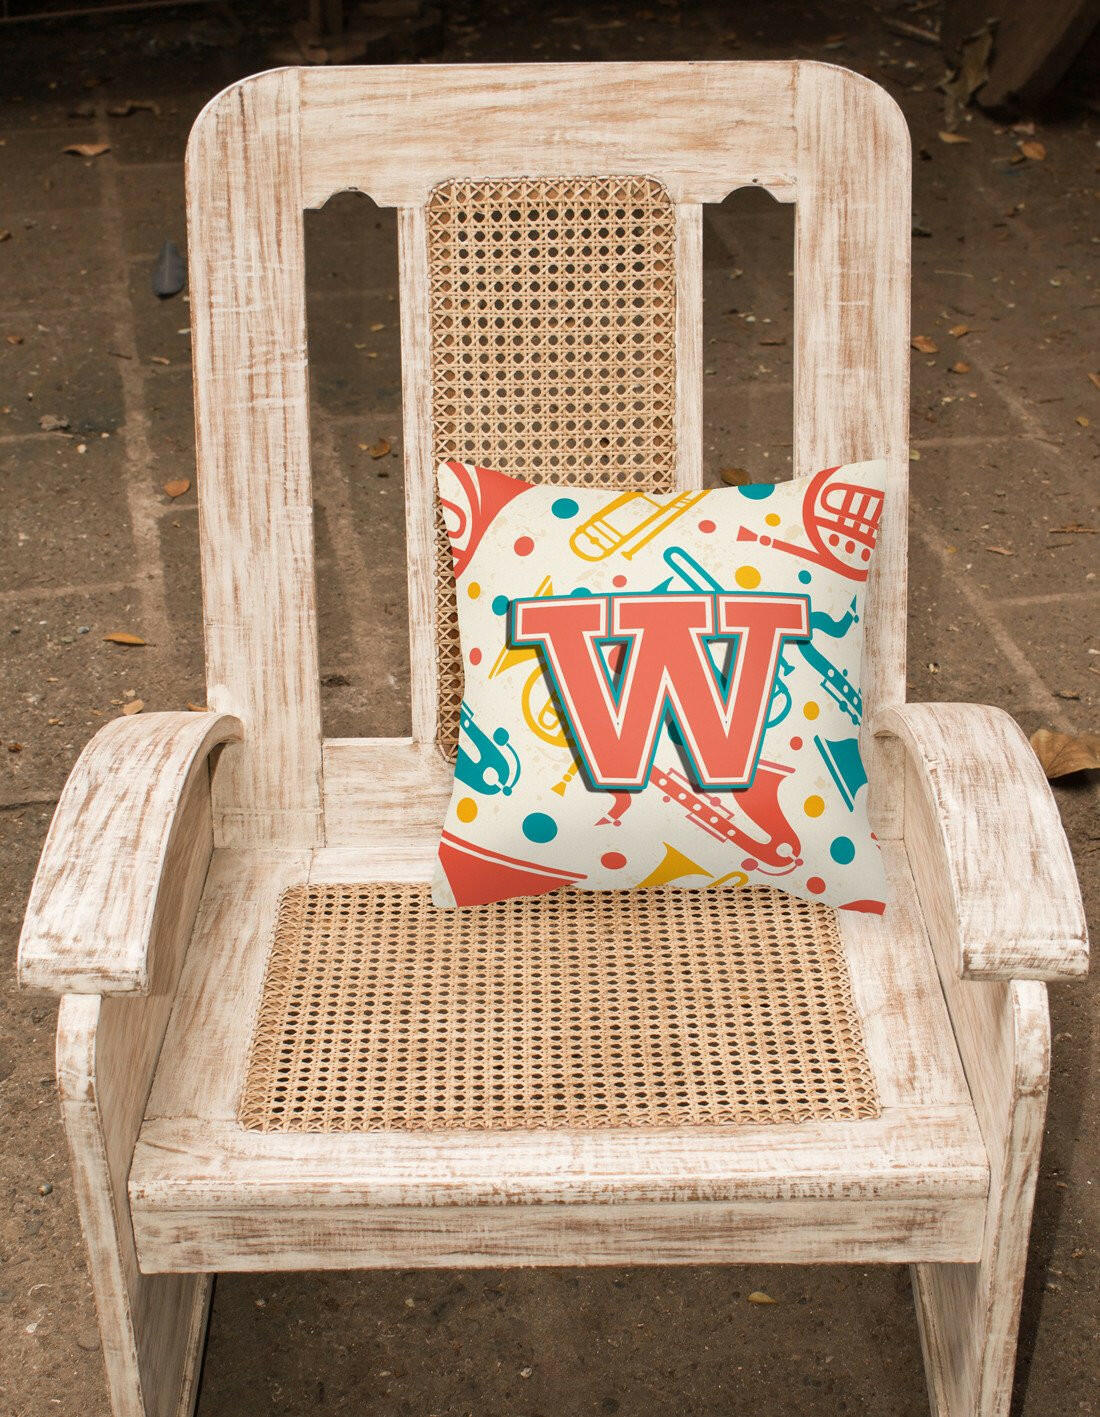 Letter W Retro Teal Orange Musical Instruments Initial Canvas Fabric Decorative Pillow CJ2001-WPW1414 by Caroline's Treasures